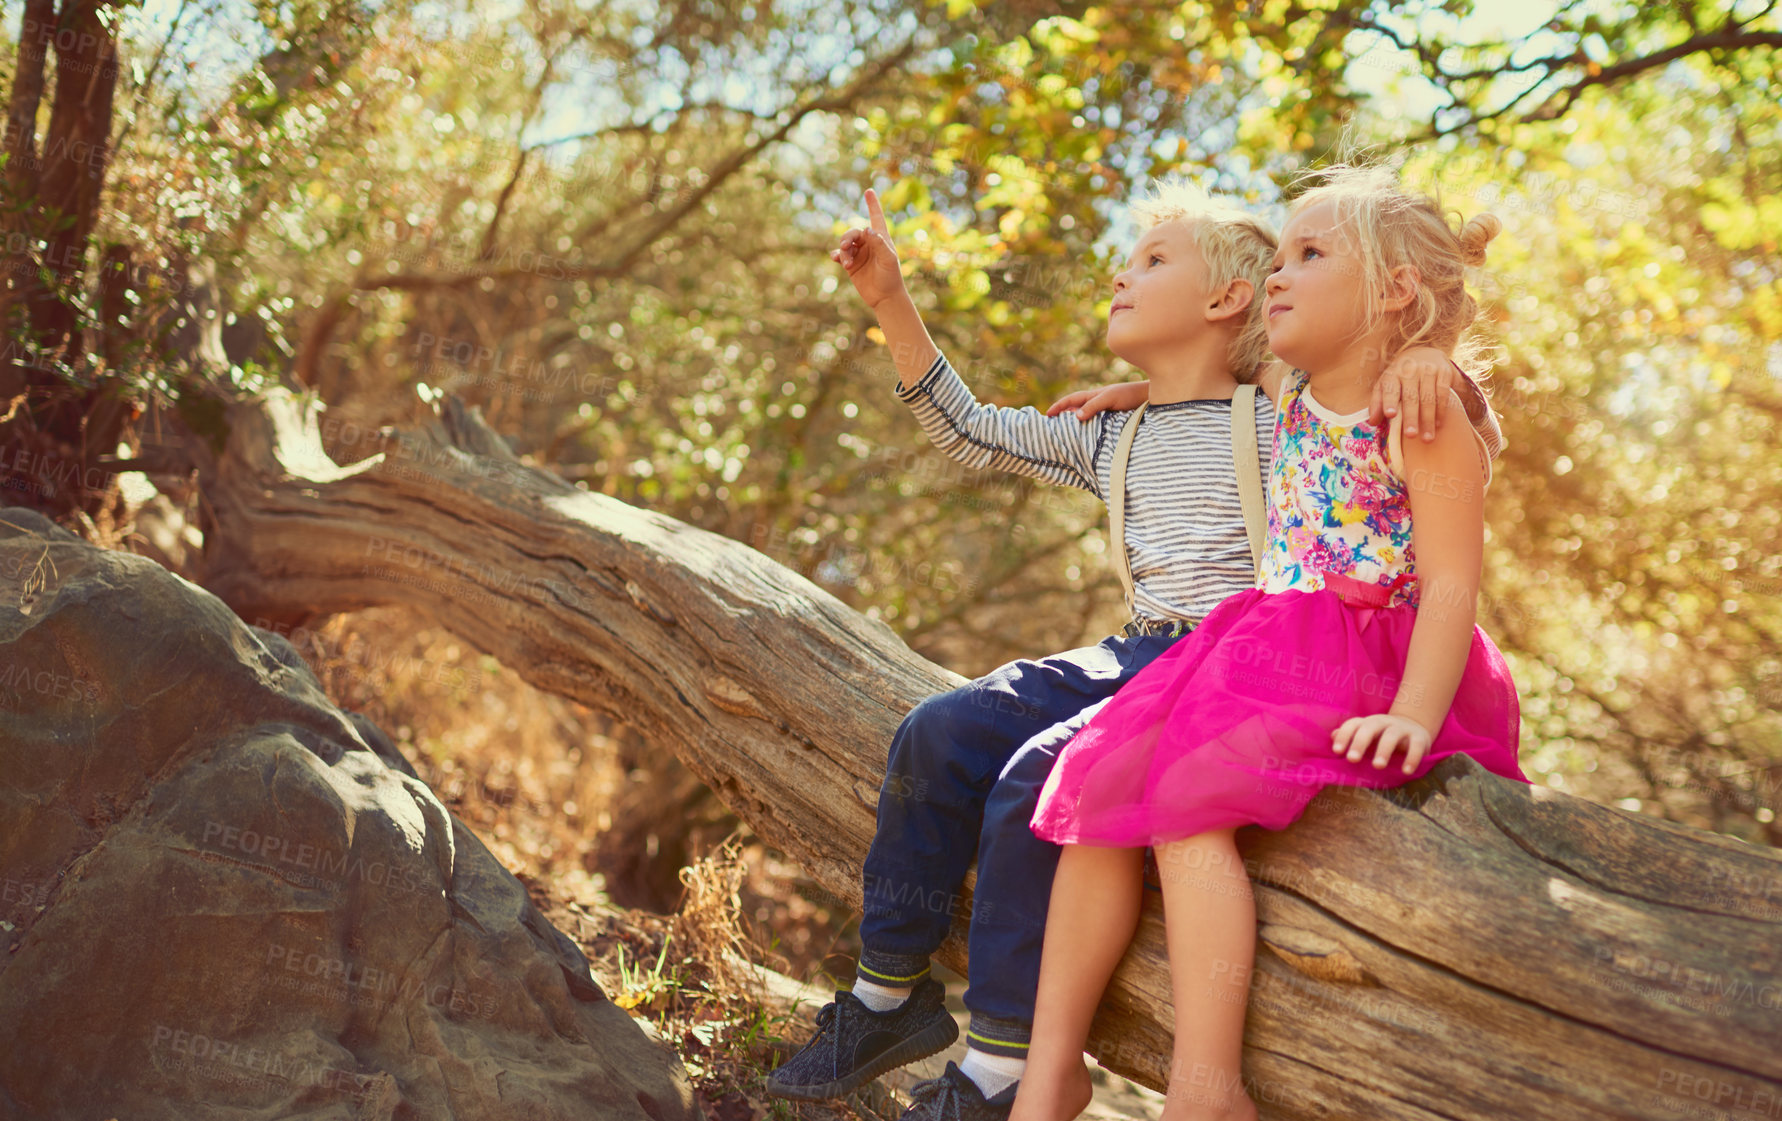 Buy stock photo Shot of two little children playing together outdoors